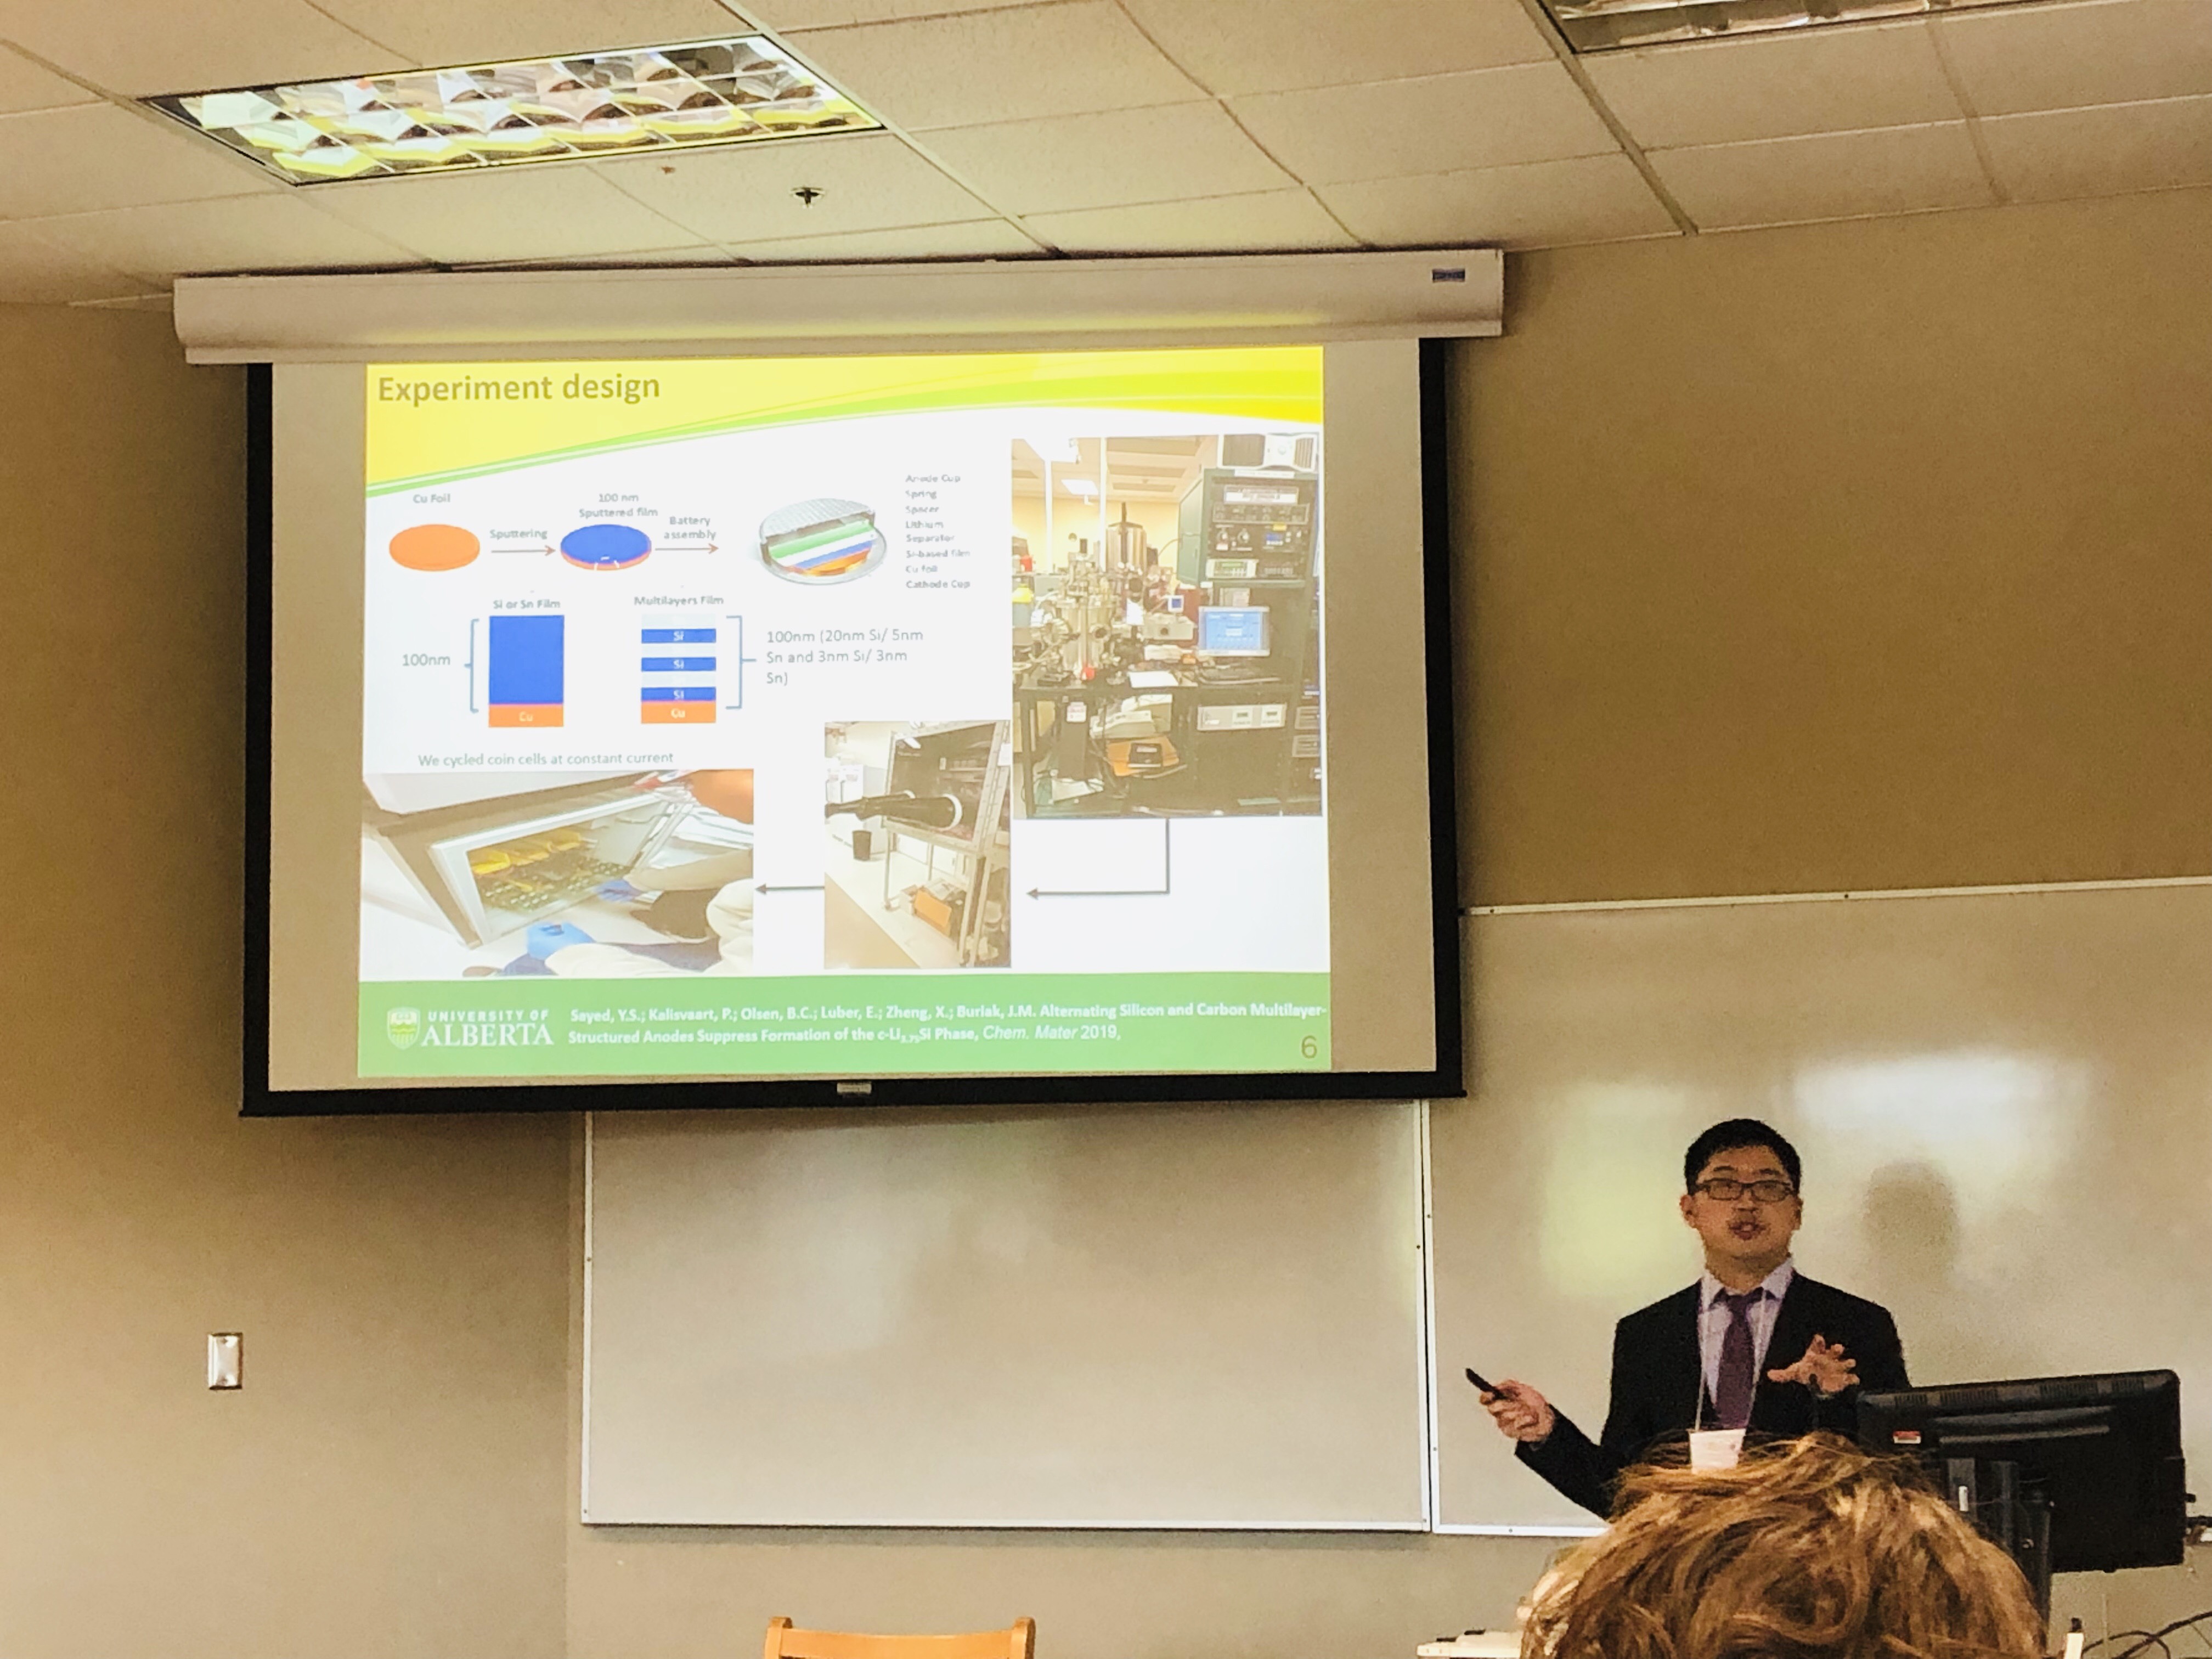 Chengchao at WCUCC 2019 in Kelowna, BC